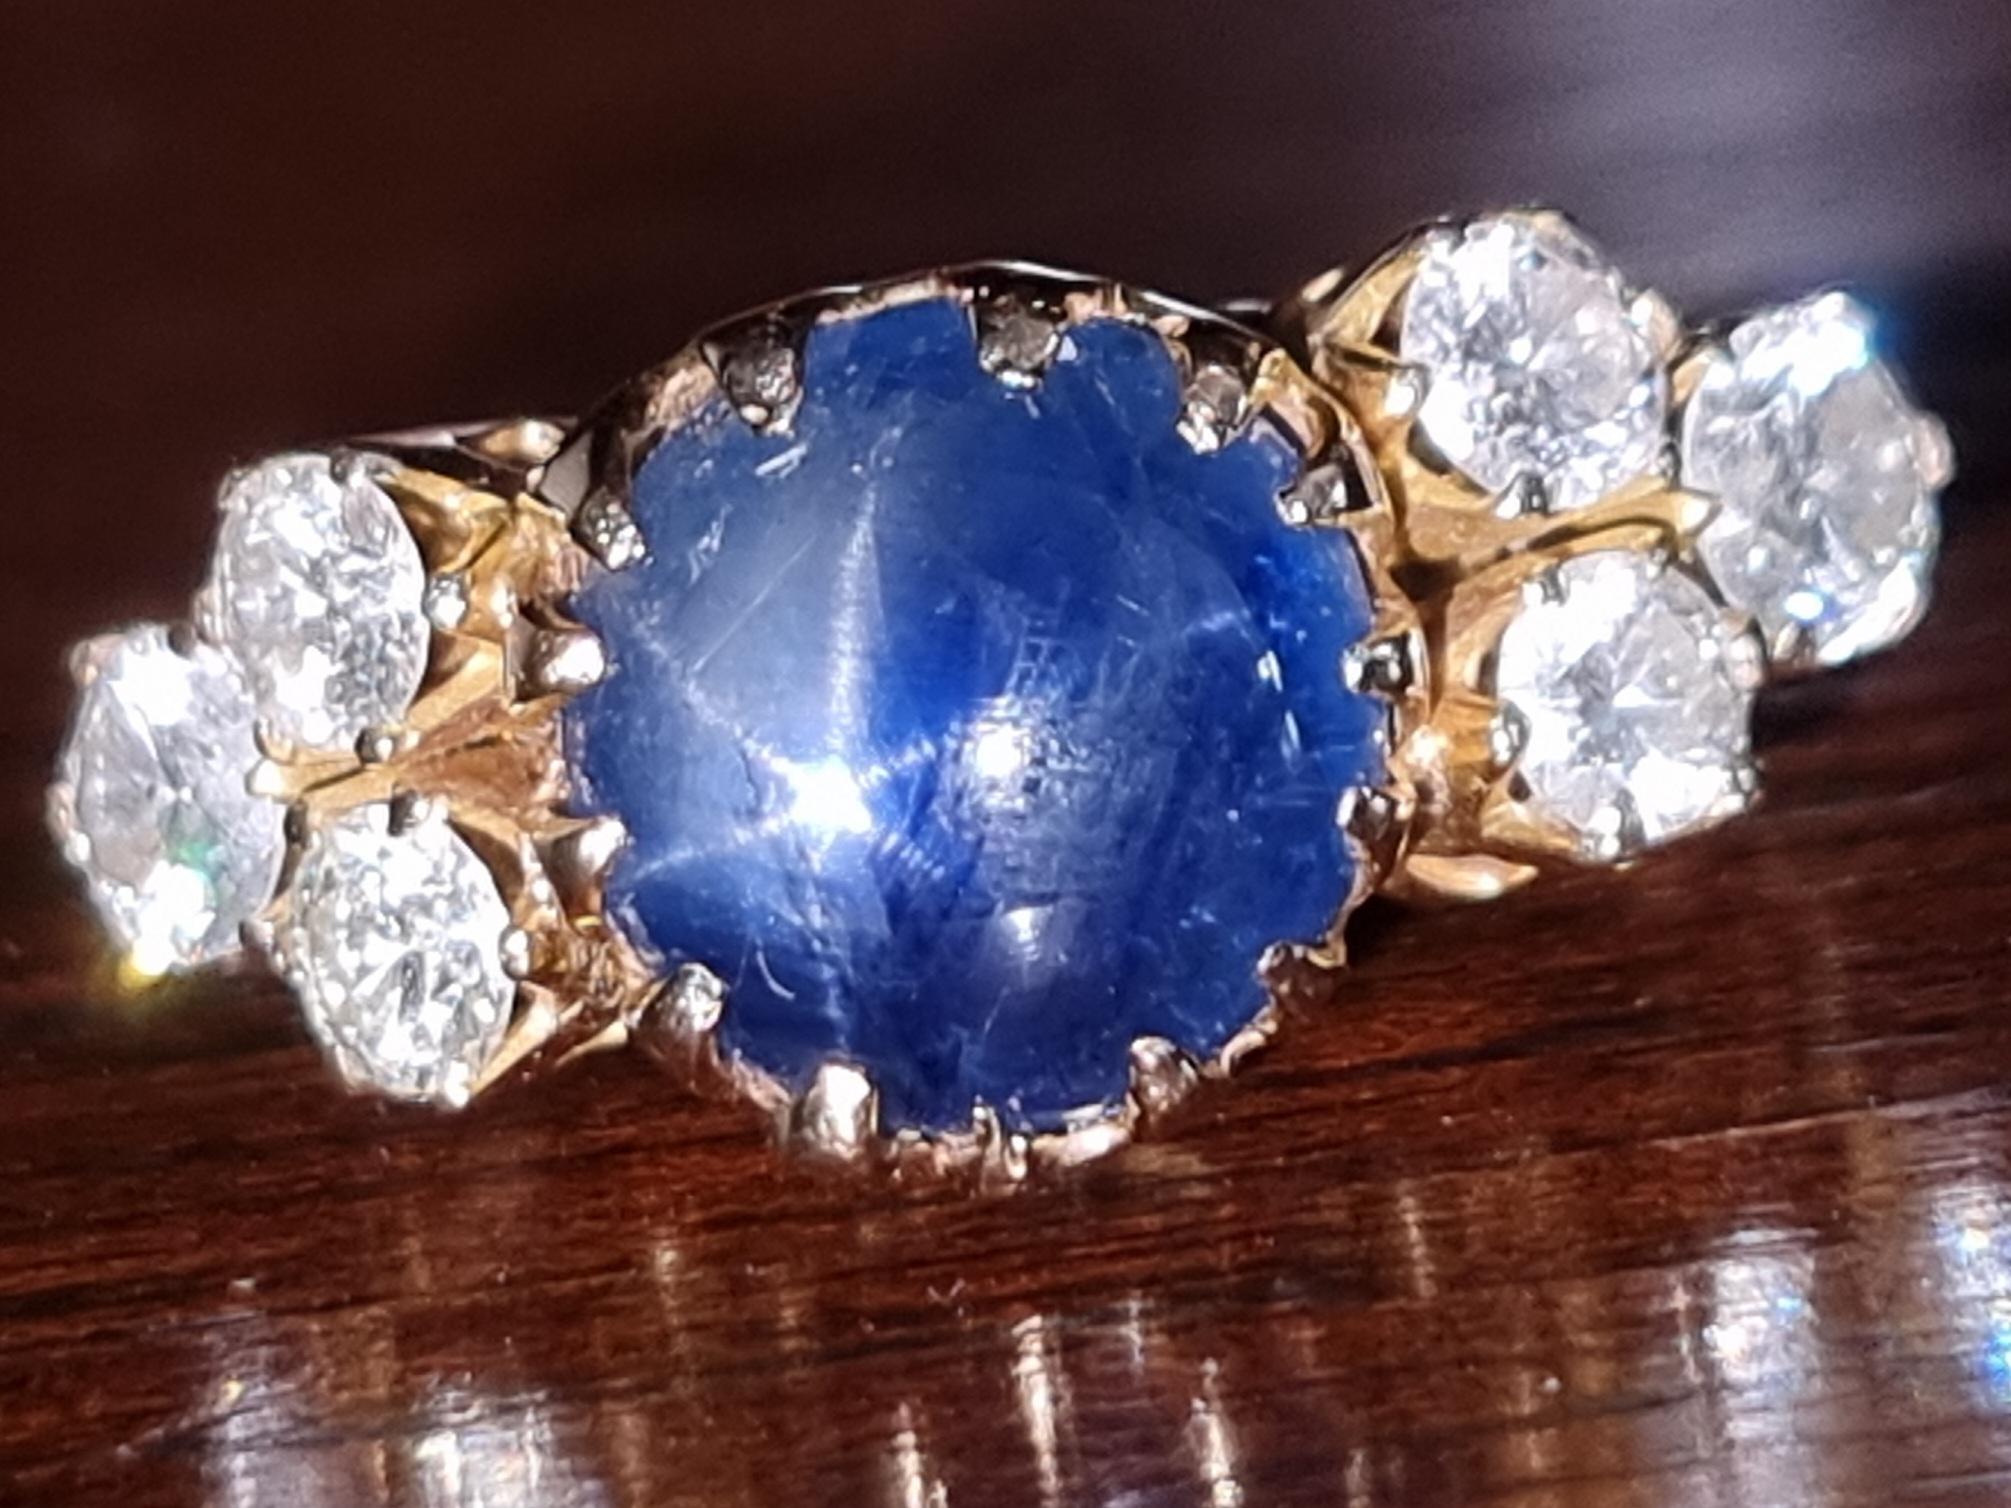 Modernist Antique Burmese Certified 10.18 Carat Blue Star Sapphire and Diamond Ring For Sale